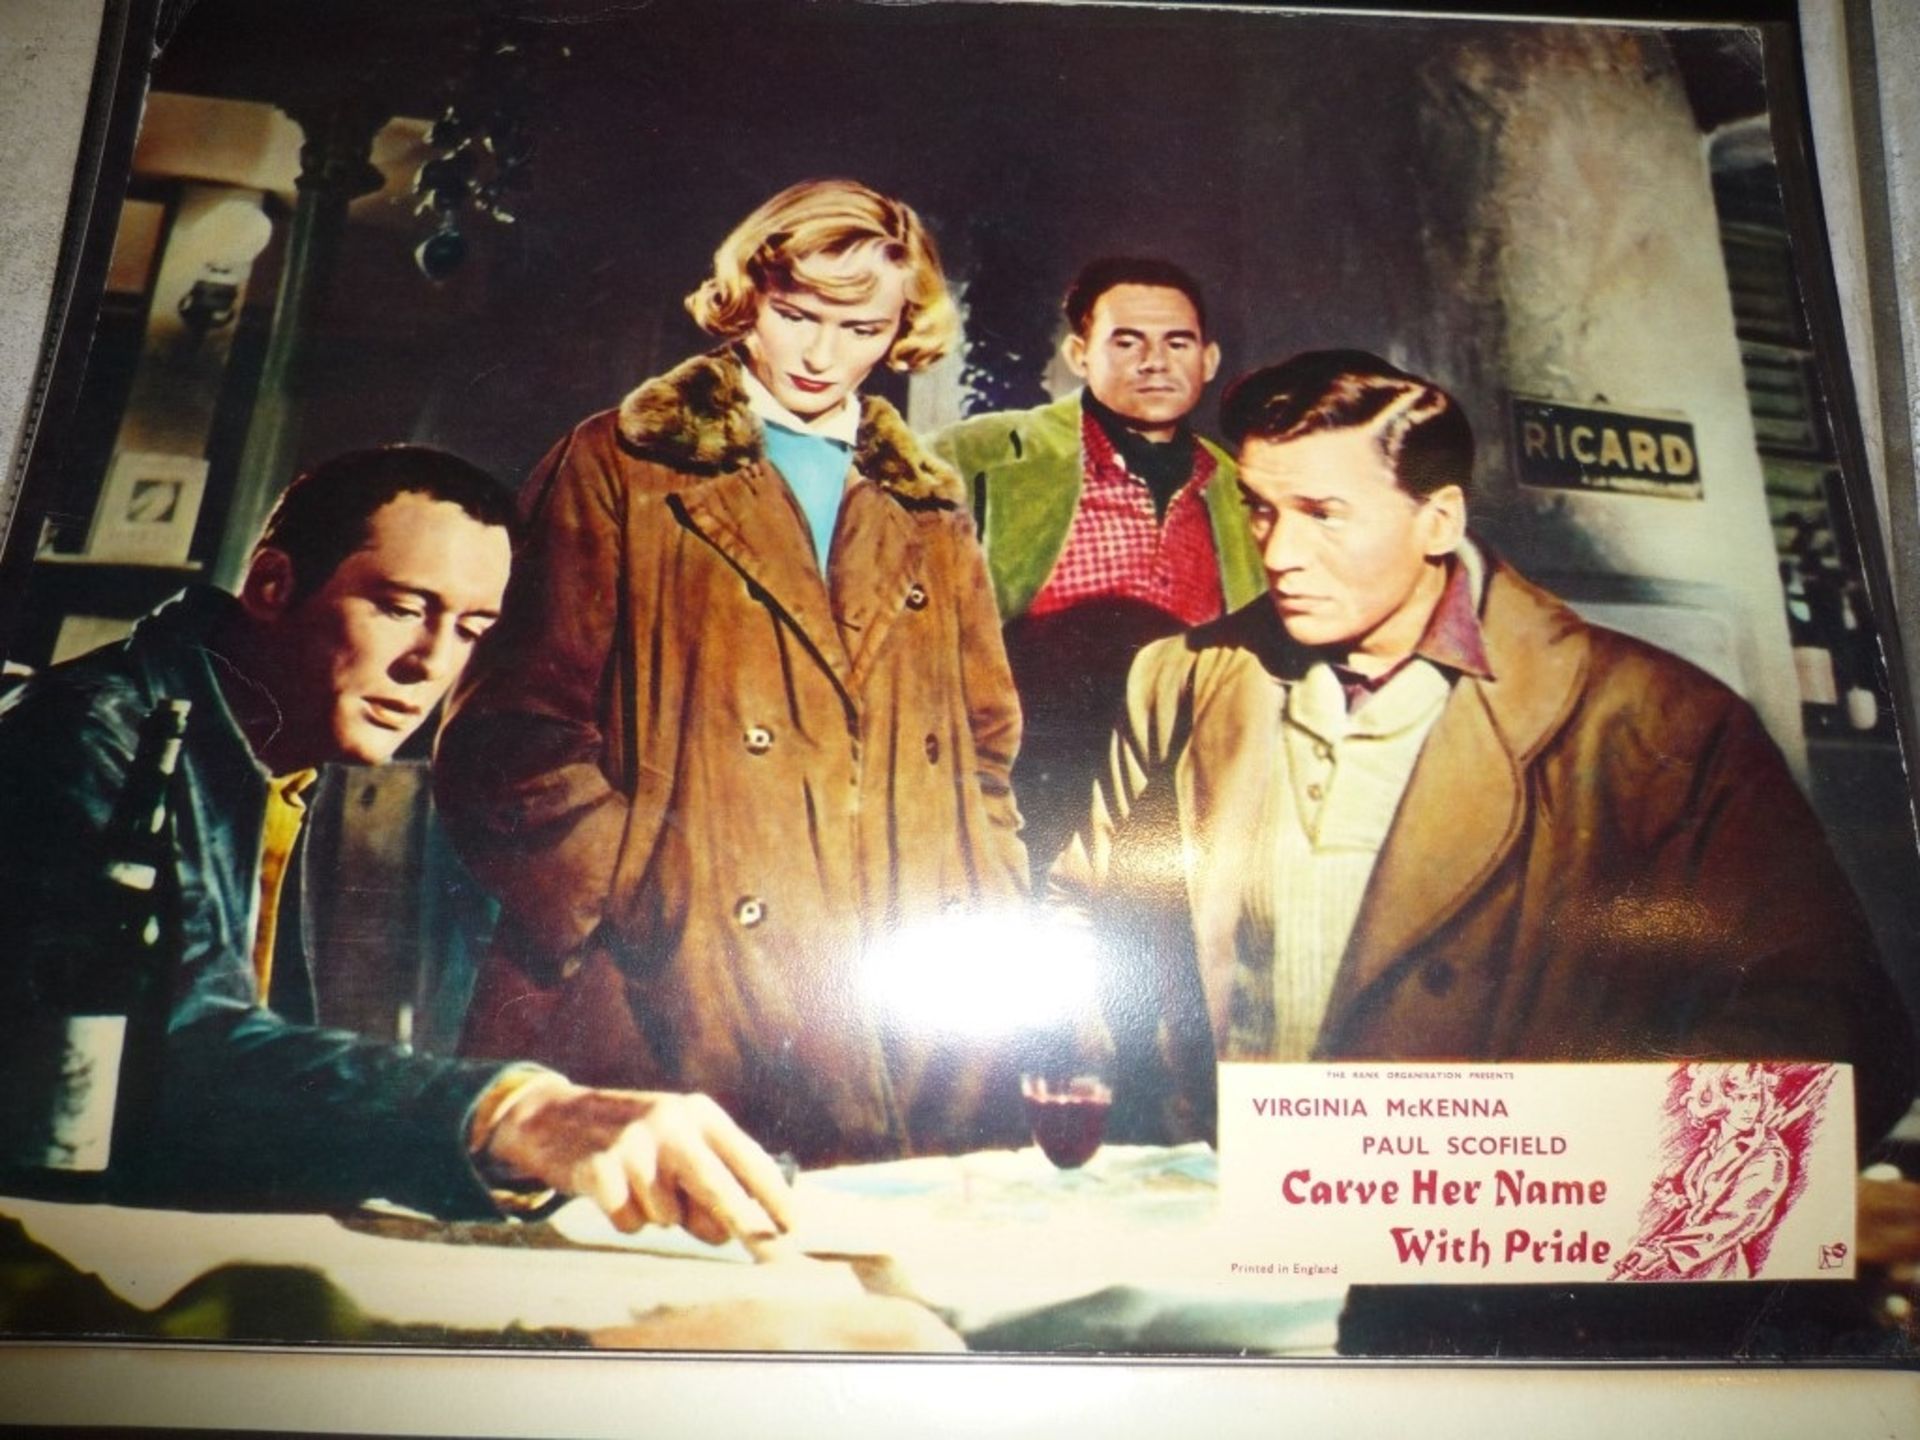 Carve Her Name with Pride lobby card